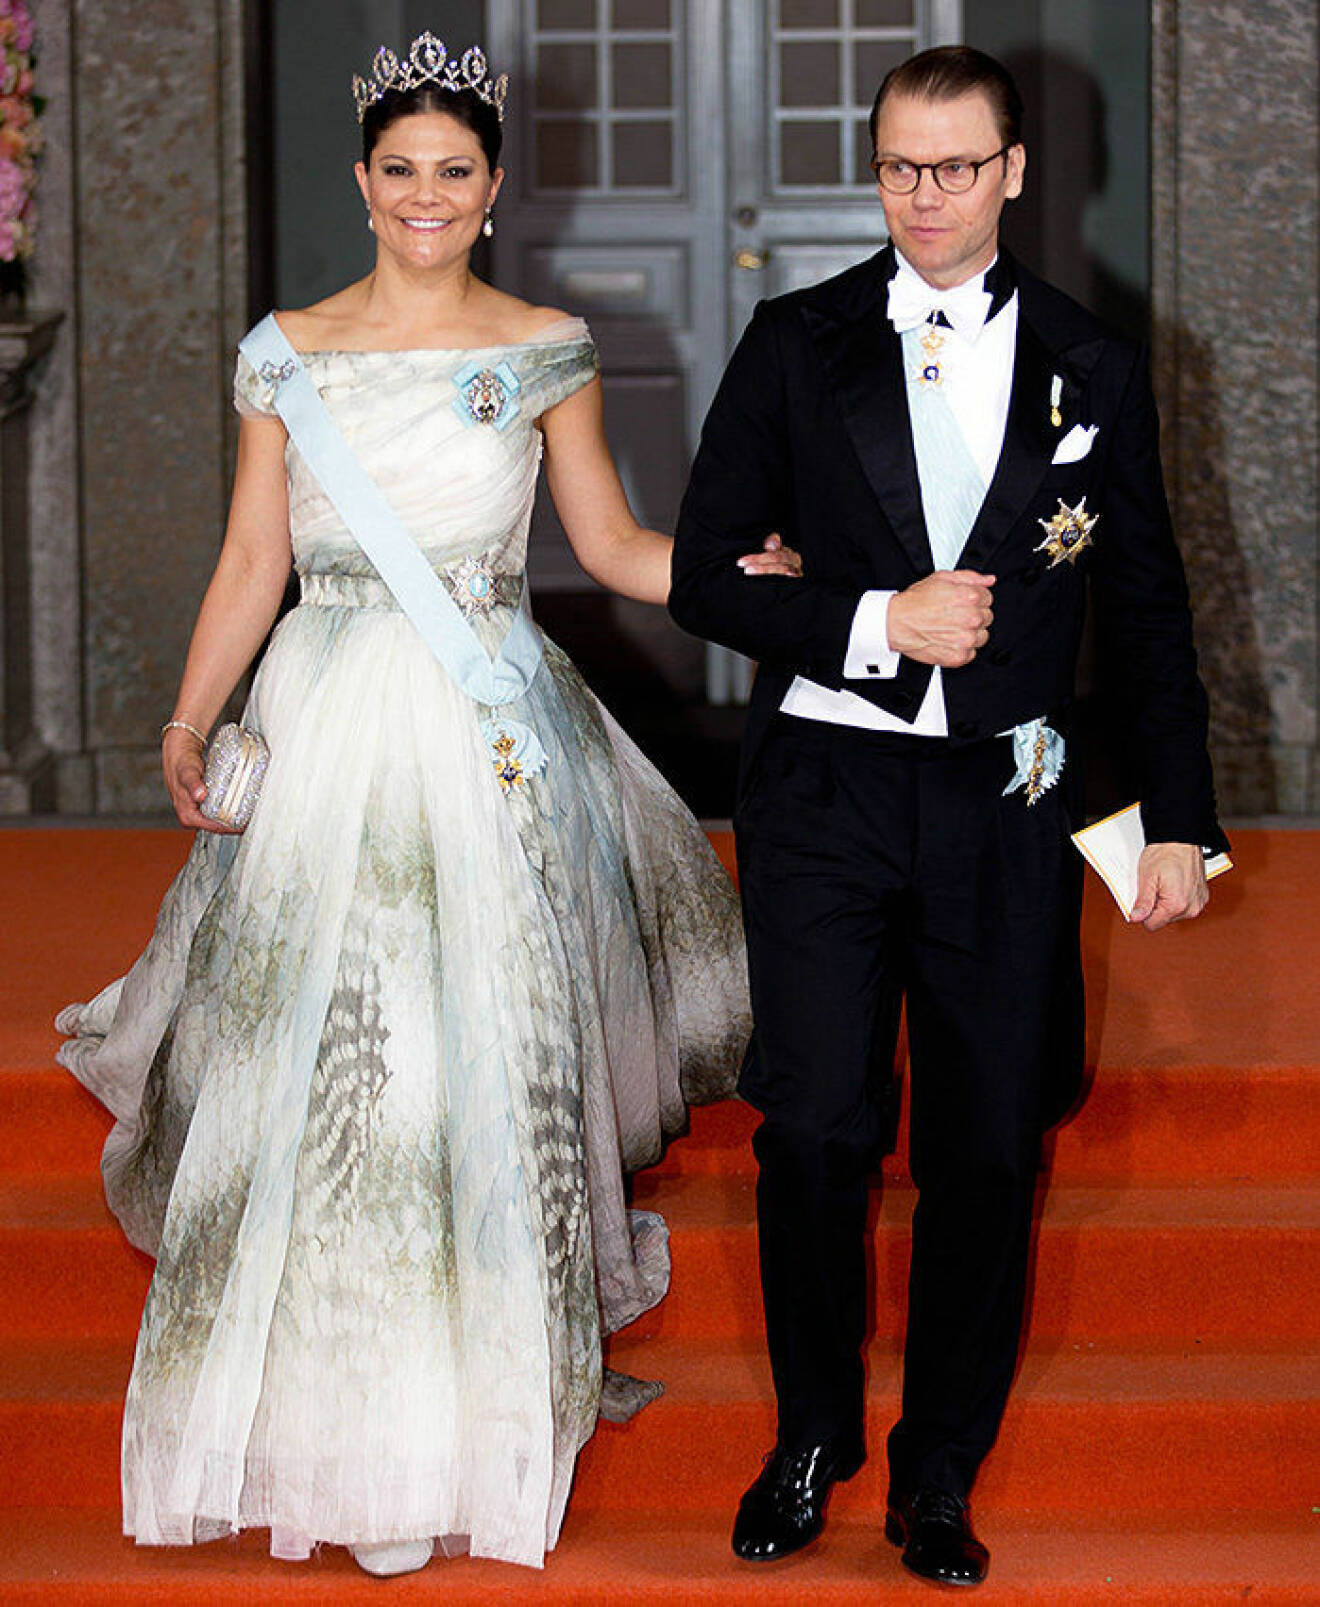 Royal wedding with Prince Carl Philip and Miss Sofia Hellqvist in the Royal Chapel at the Royal Palace in Stockholm. - arrivals; inner courtyard Victoria de Suede;Daniel Westling